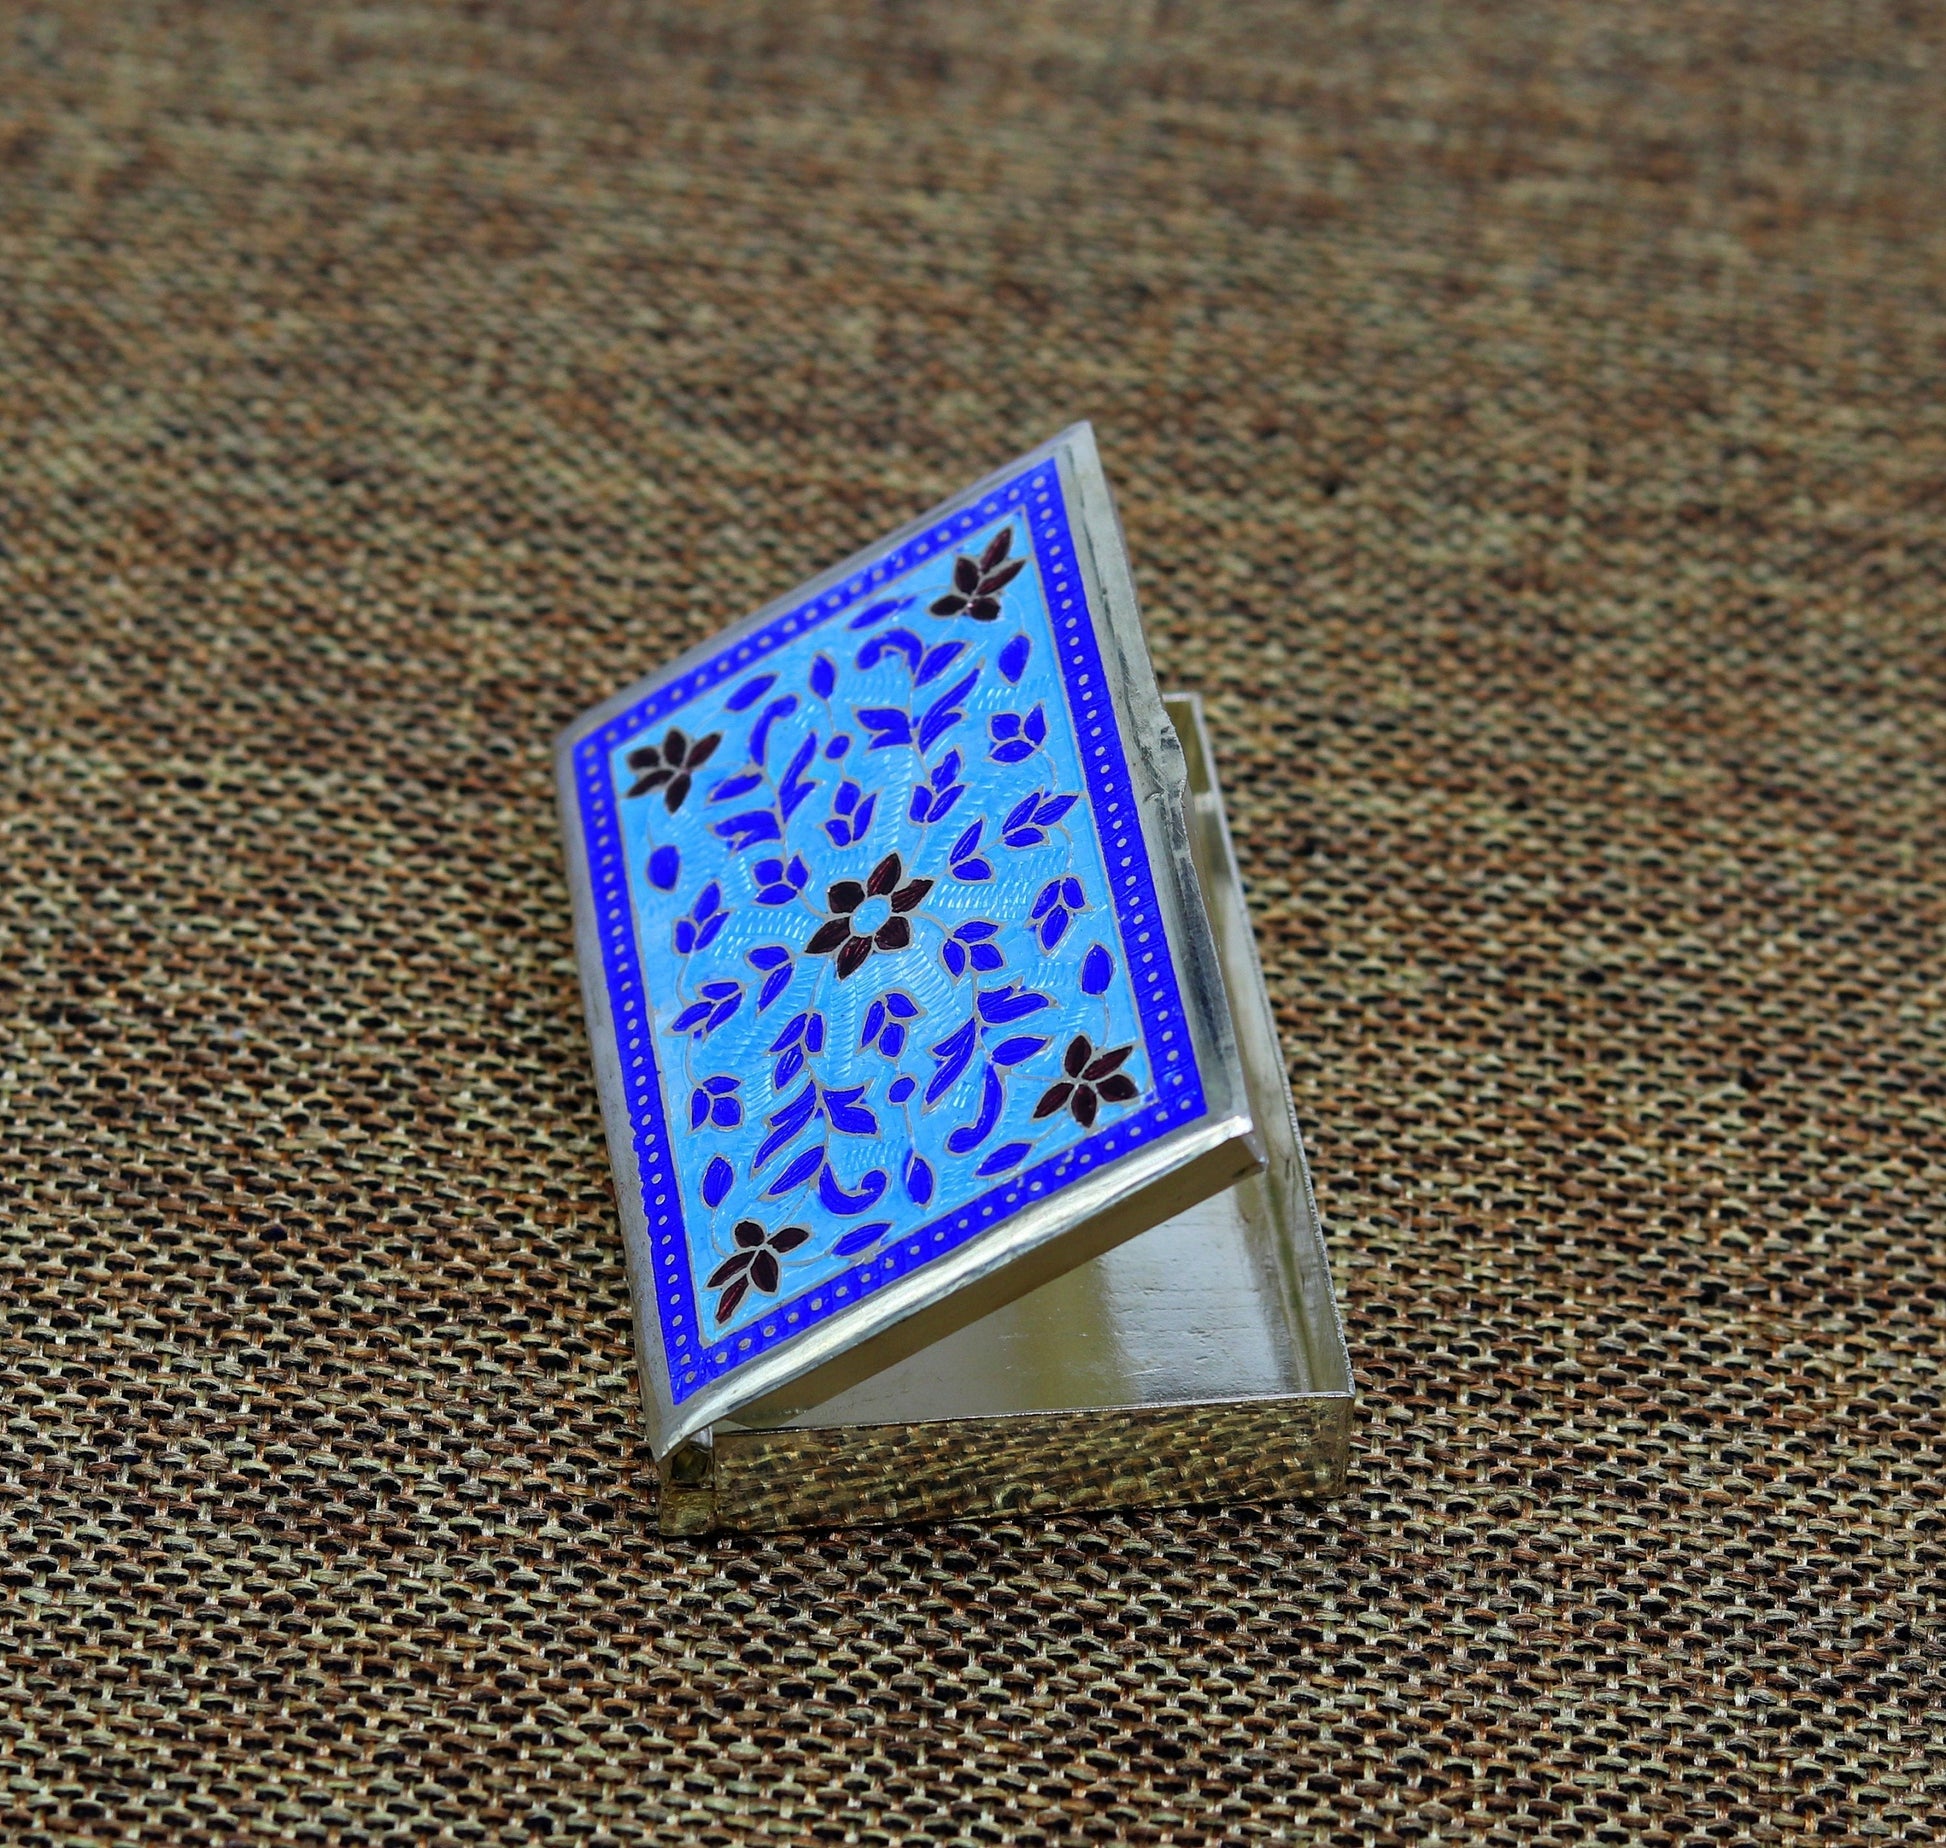 Handmade pure silver 925 sterling silver floral enamel work customize trinket, jewelry box, pills box, silver utensils brides gift stb29 - TRIBAL ORNAMENTS